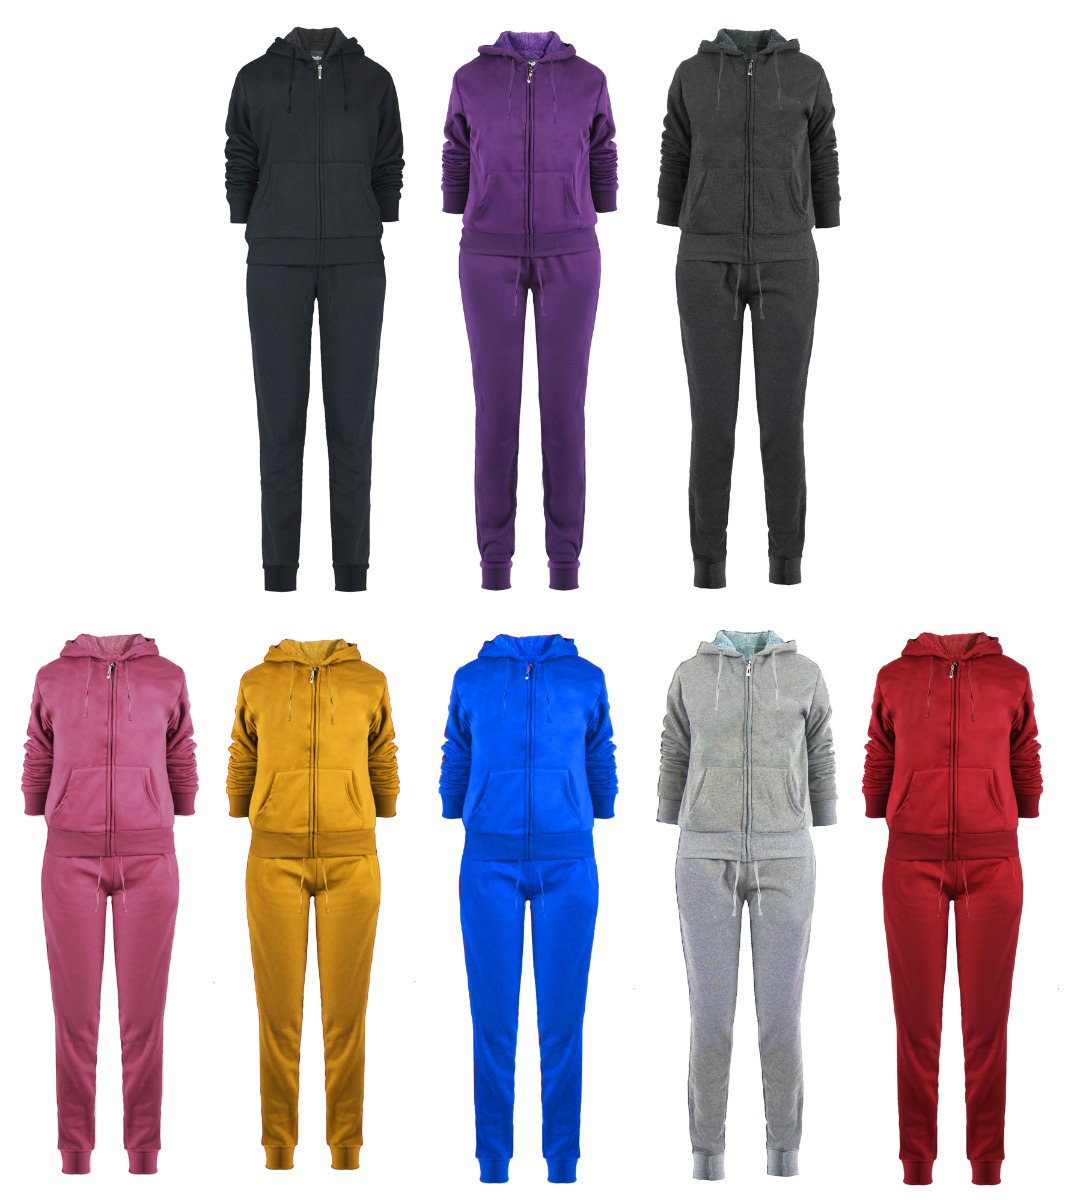 Women's Sherpa Lined 2-Piece Hooded SWEATSHIRT & Jogger Sets - Choose Your Color(s)